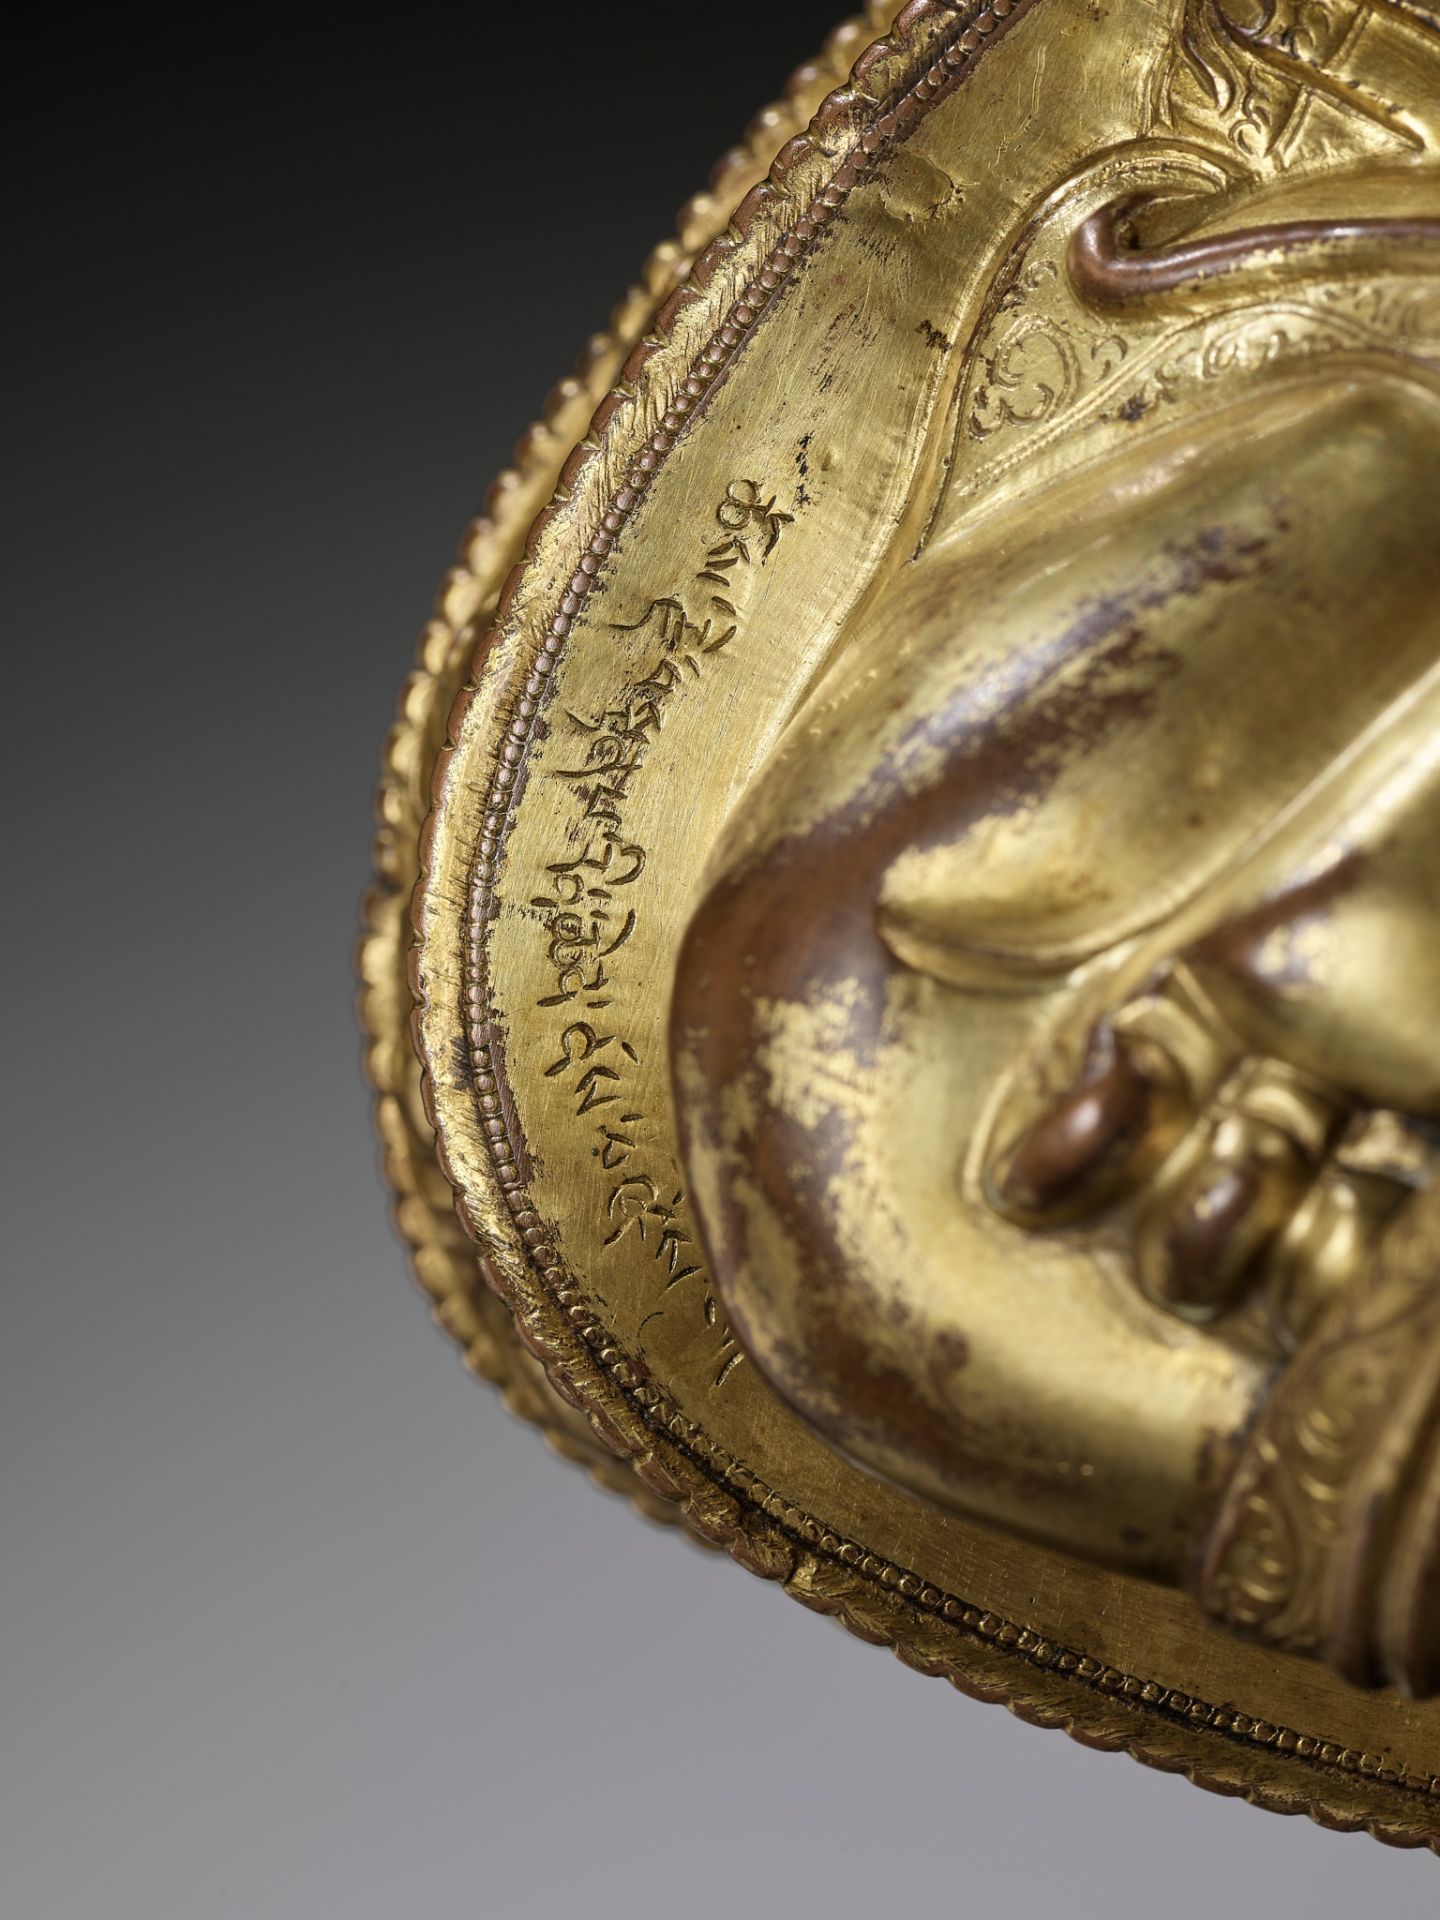 A GILT COPPER-ALLOY REPOUSSE FIGURE OF BUDDHA AMITABHA, WITH AN INSCRIPTION REFERRING TO THE SECOND - Image 10 of 16